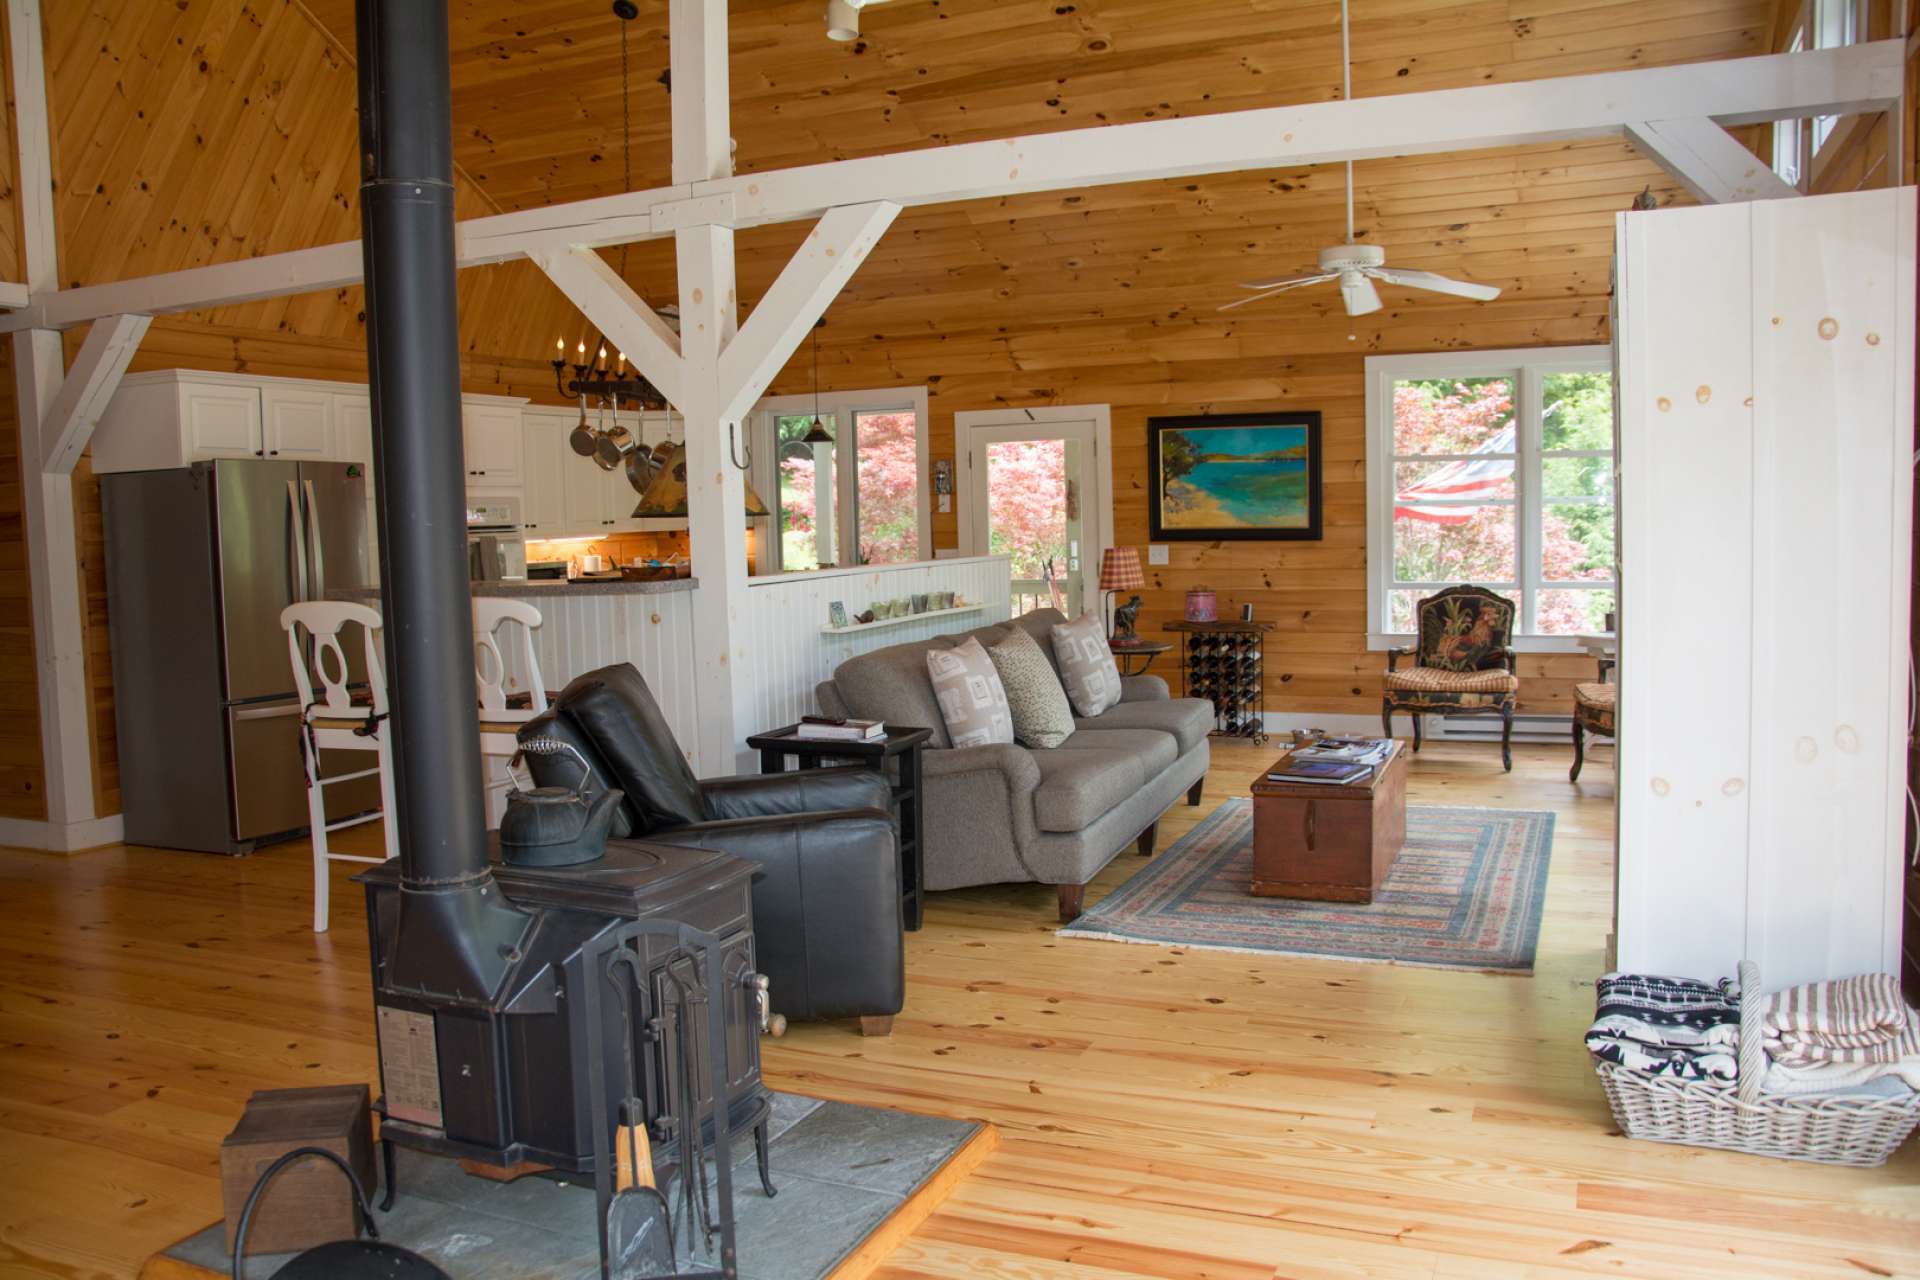 The main home is both elegant and rustic offering wood floors and vaulted tongue and groove ceilings.